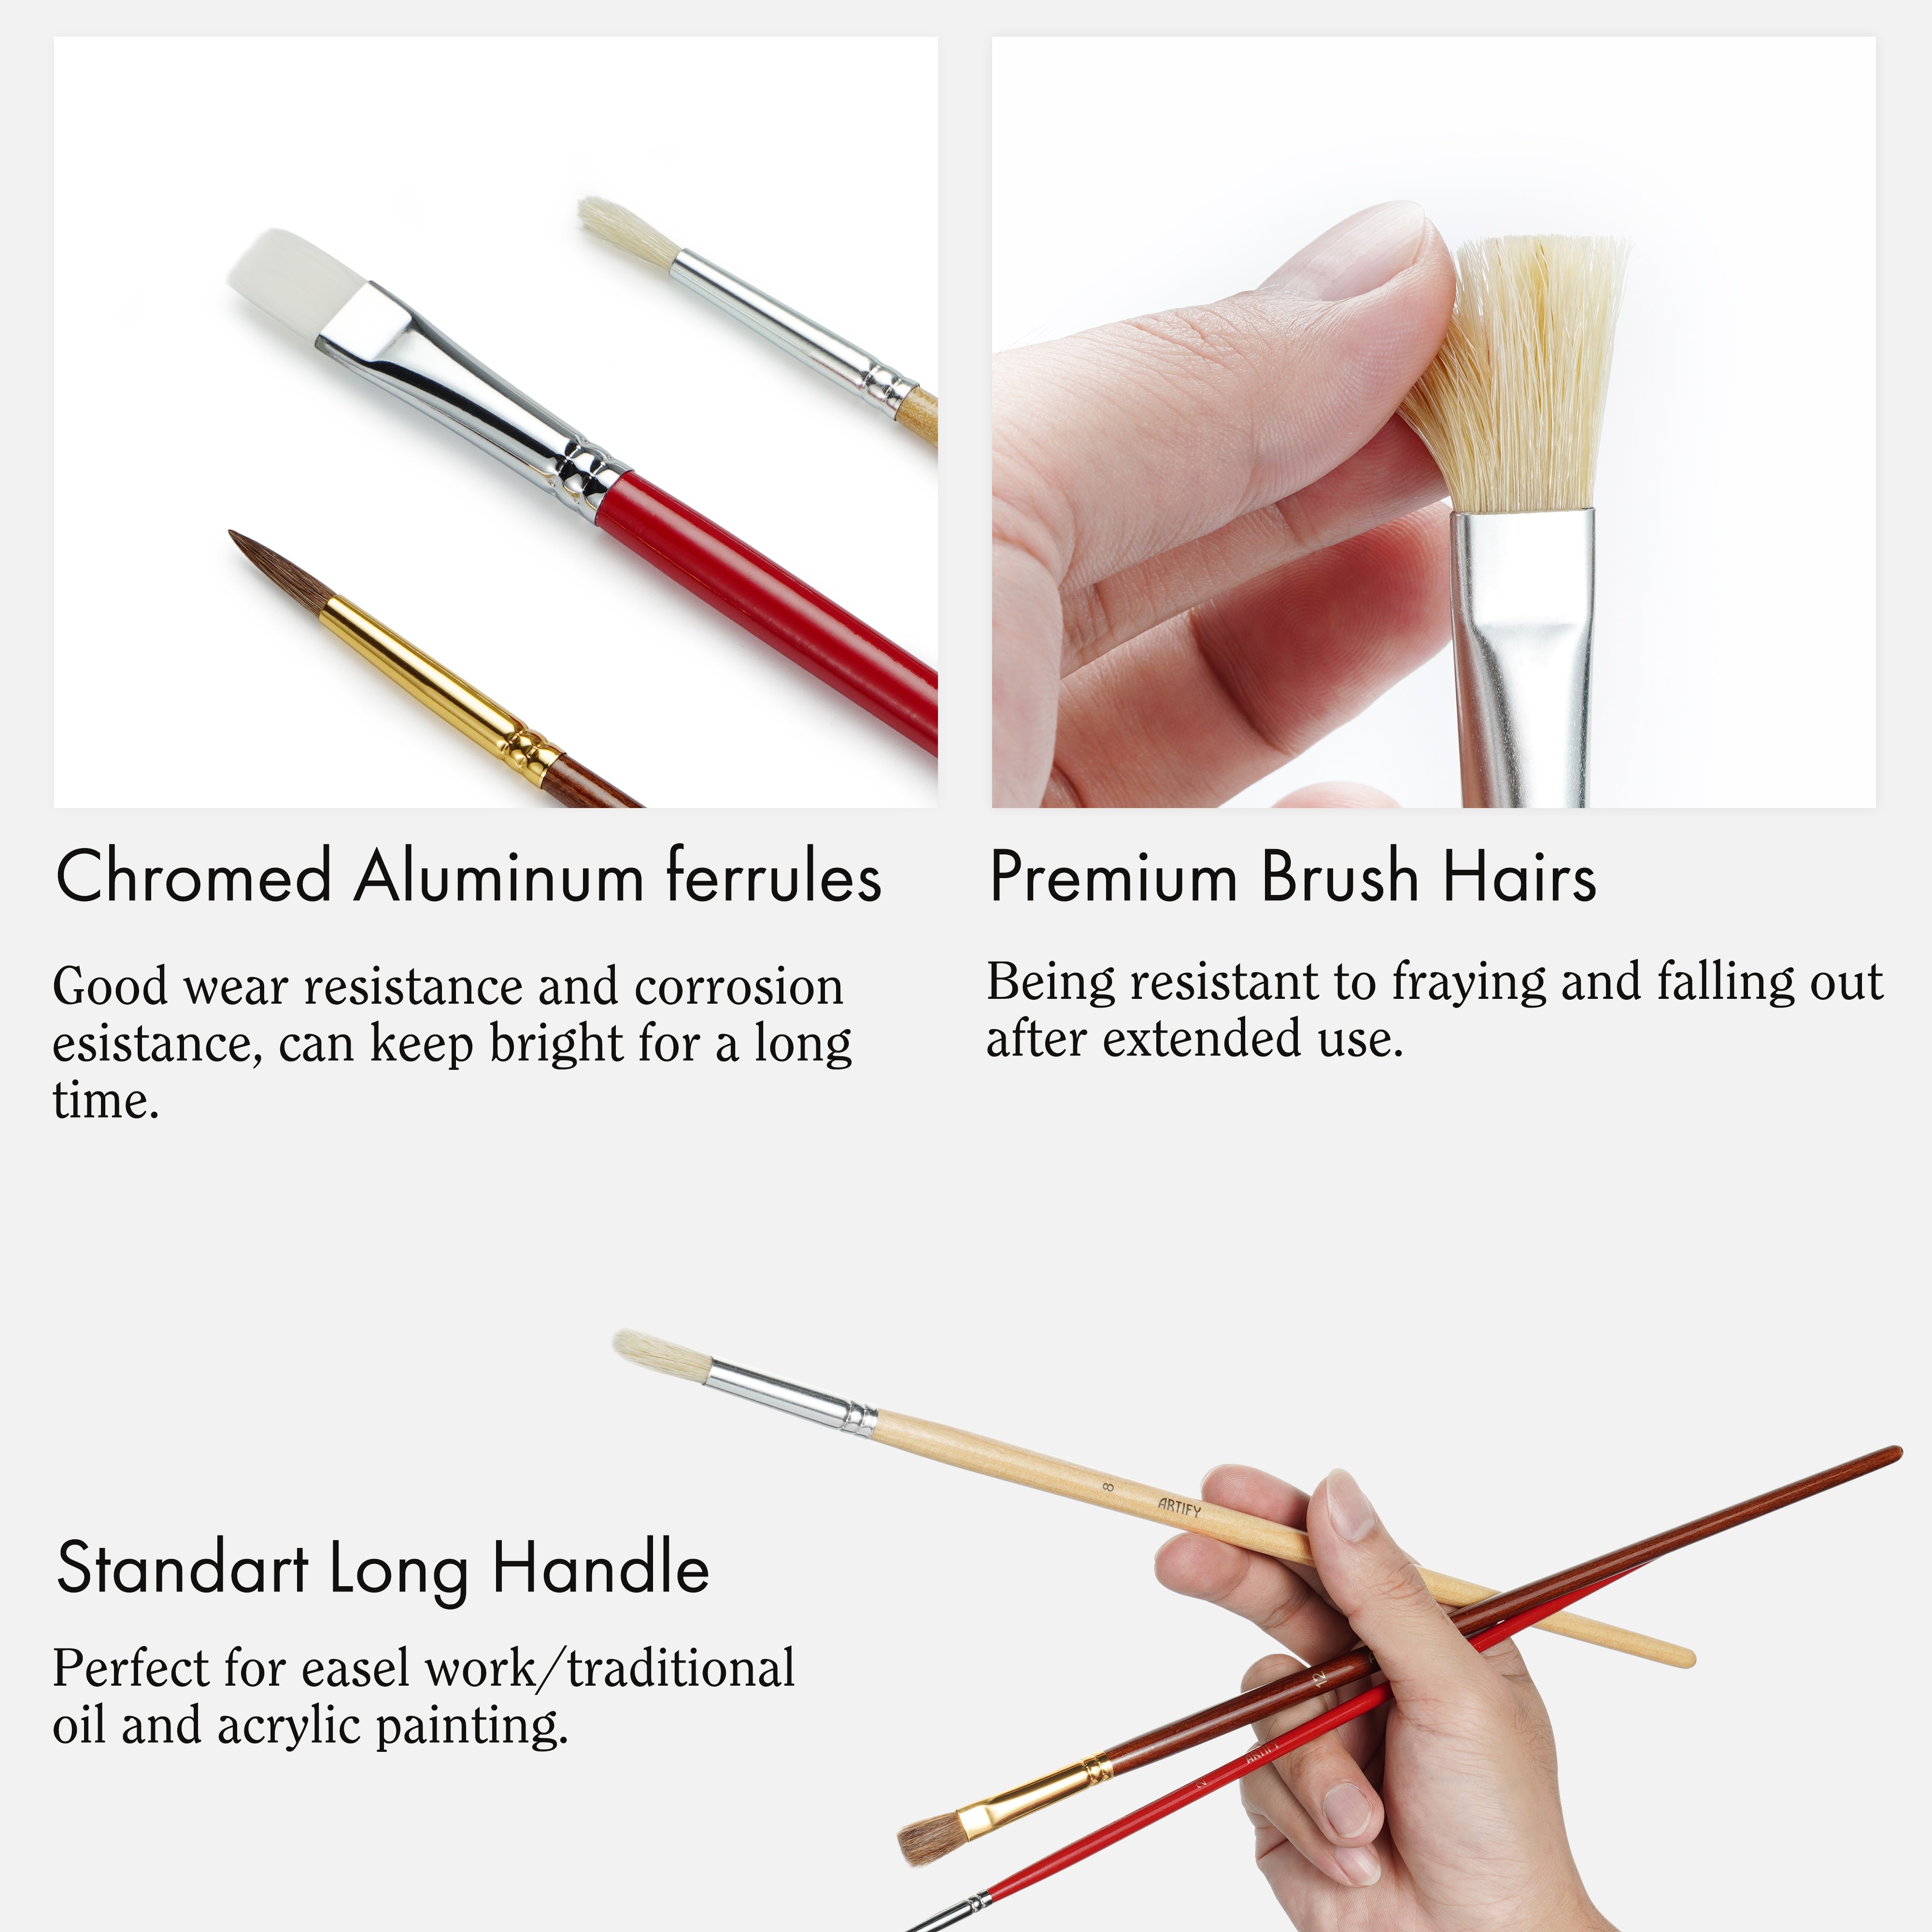 Oil Paint Brushes: How to Choose & Use the Best Brushes